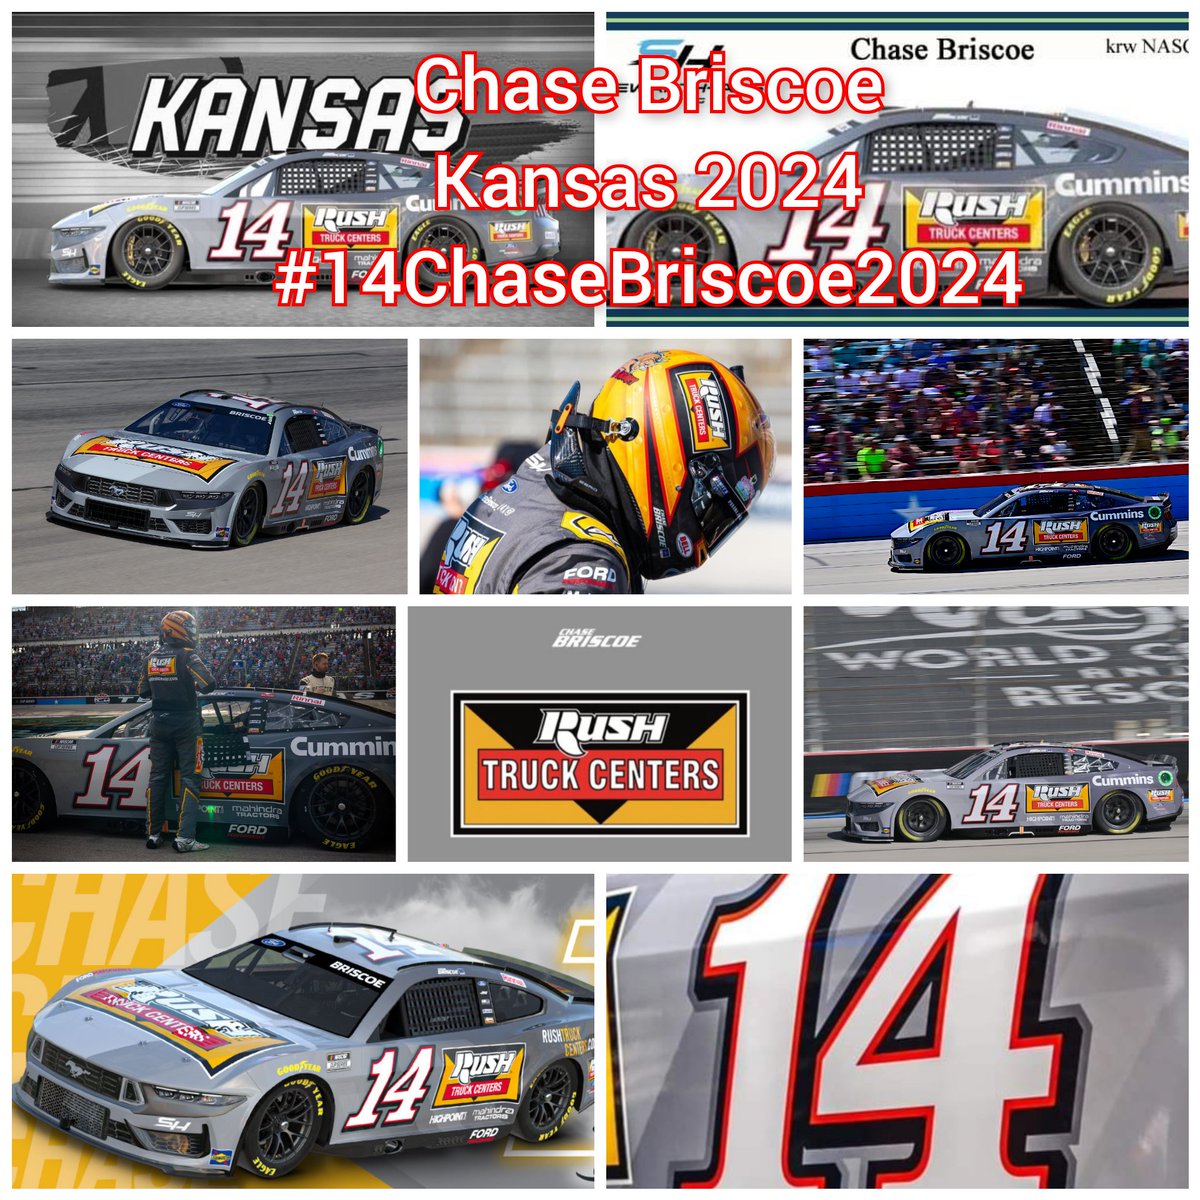 @ChaseBriscoe_14 Go Get the win tomorrow Chase Briscoe I have to work but I believe you will win At Kansas so proud to be a Chase Briscoe #14 Fan.
#14ChaseBriscoe2024